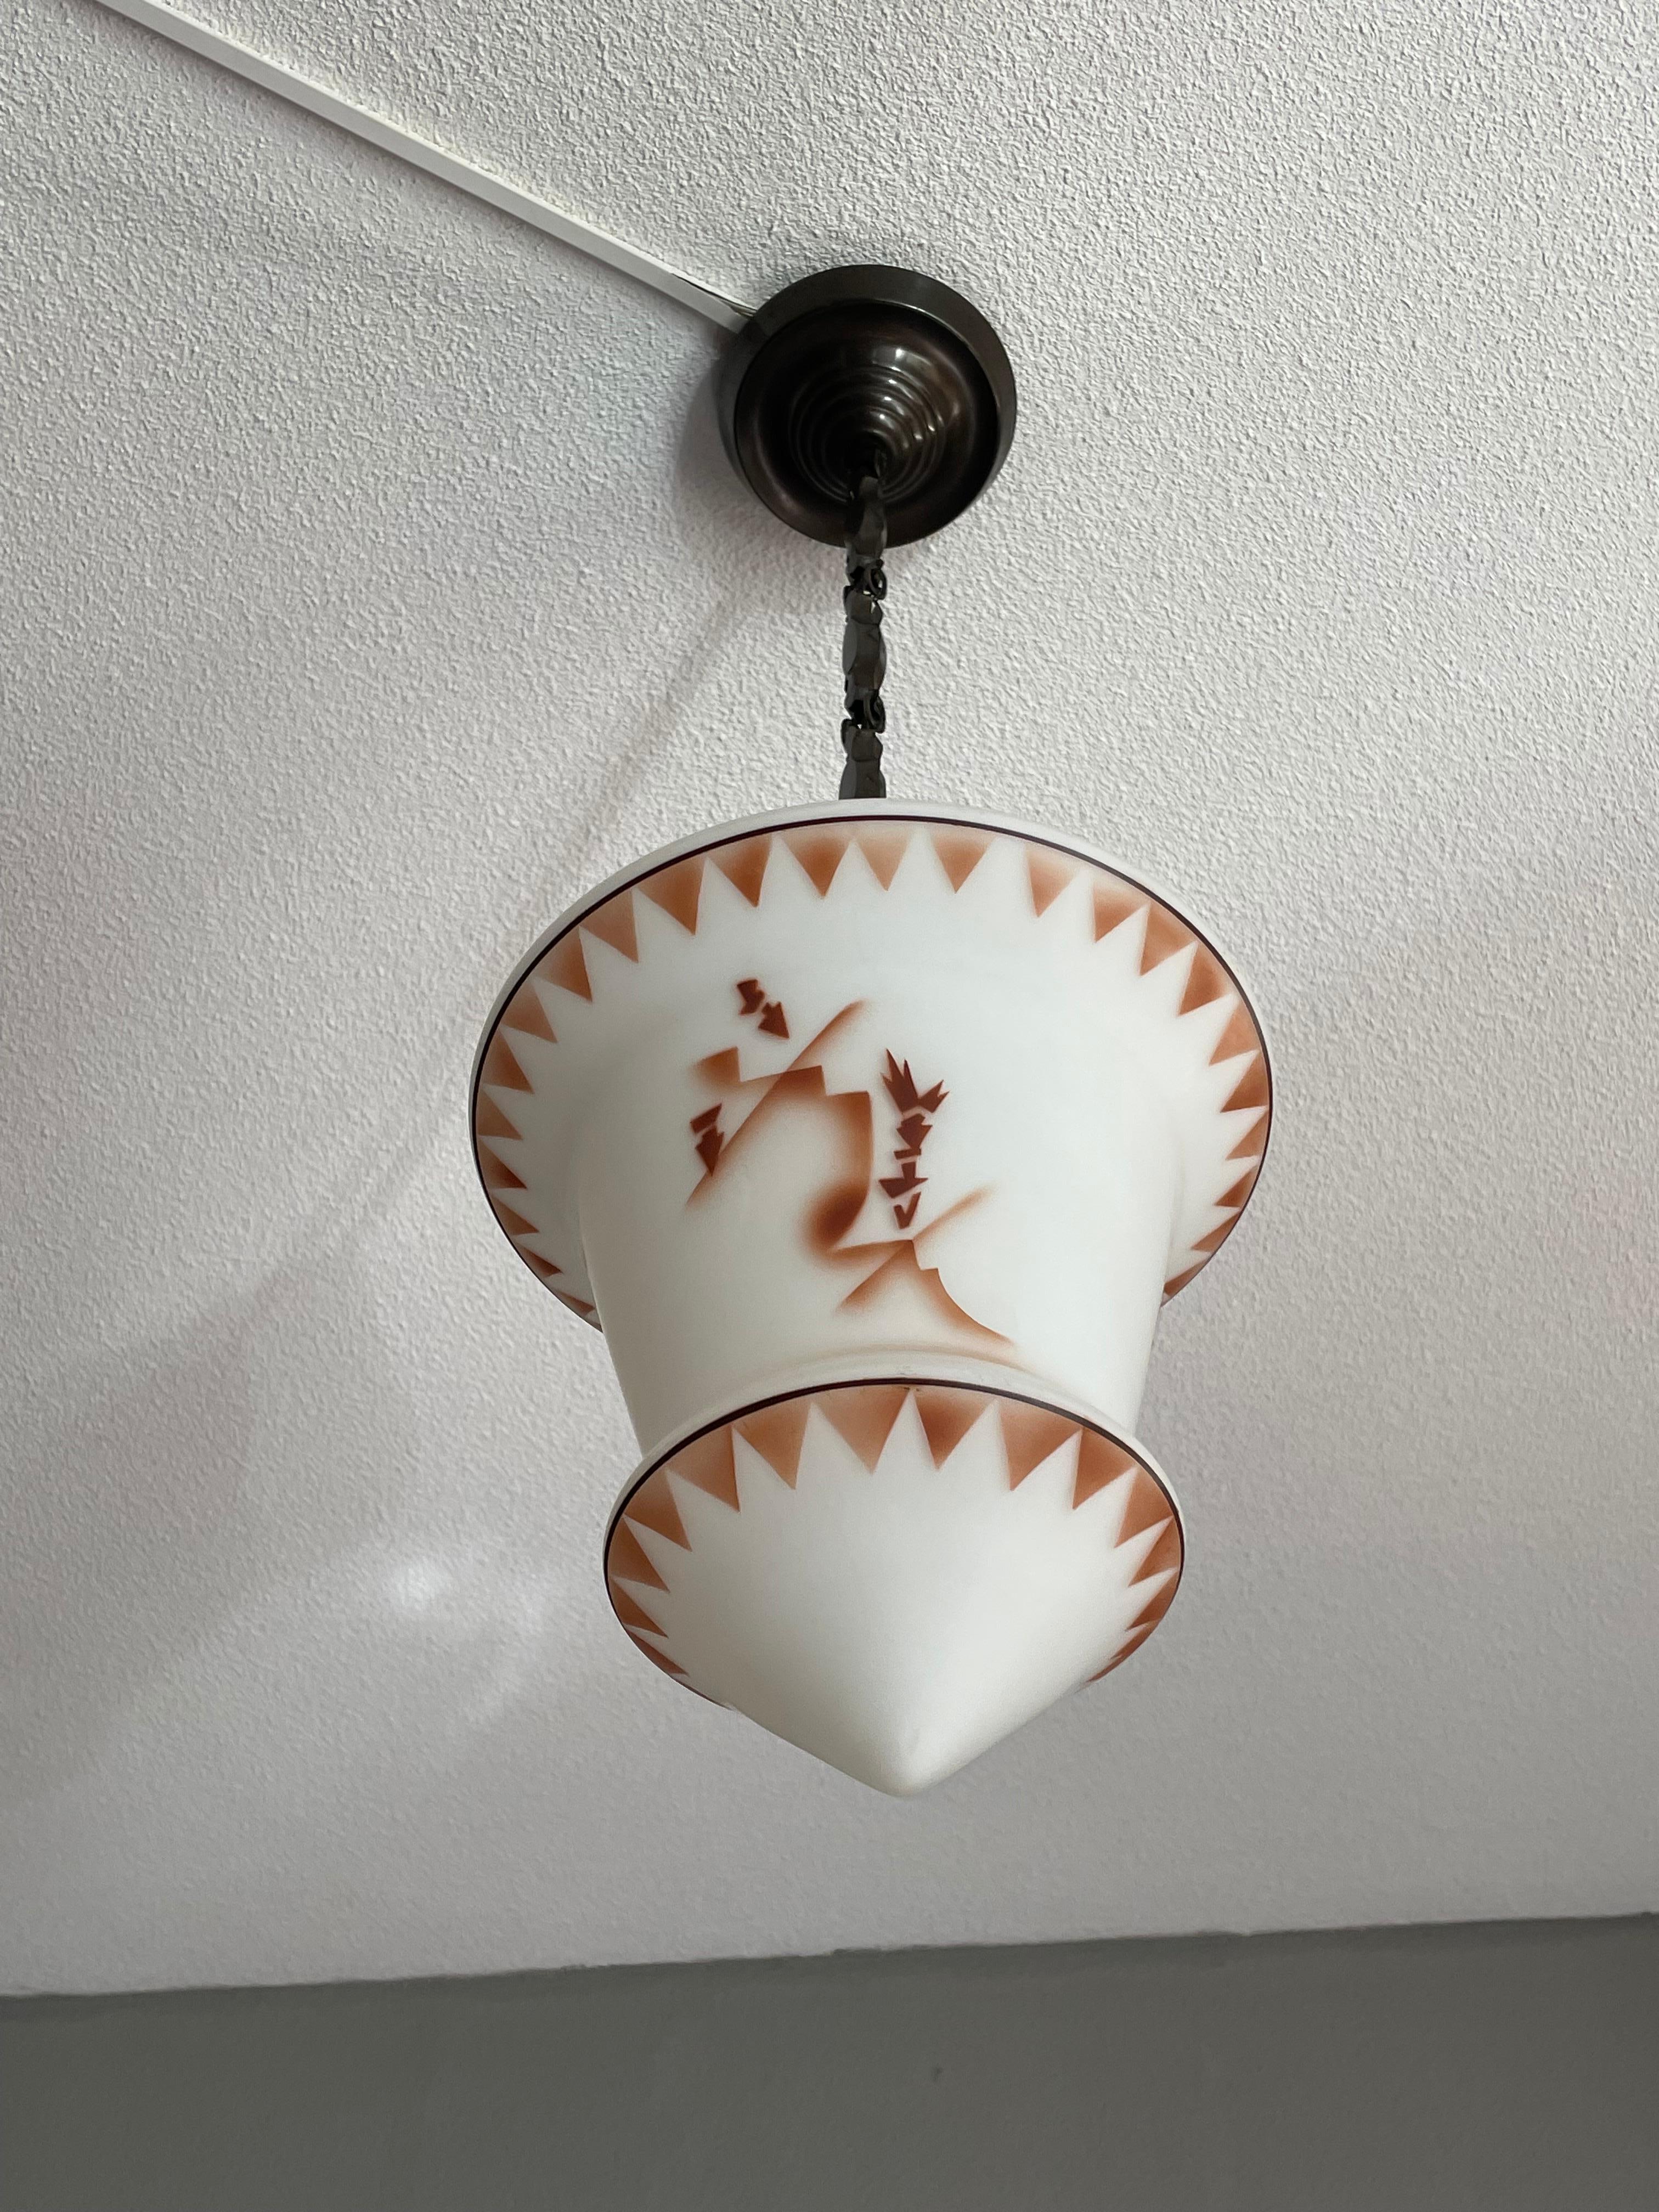 Handcrafted and rare, Asian style, opaline glass lantern pendant.

This rare combination-of-styles pendant is in superb condition and a joy to own and look at. We had never before seen a 1920s pendant of this rare Asian design and to have found it